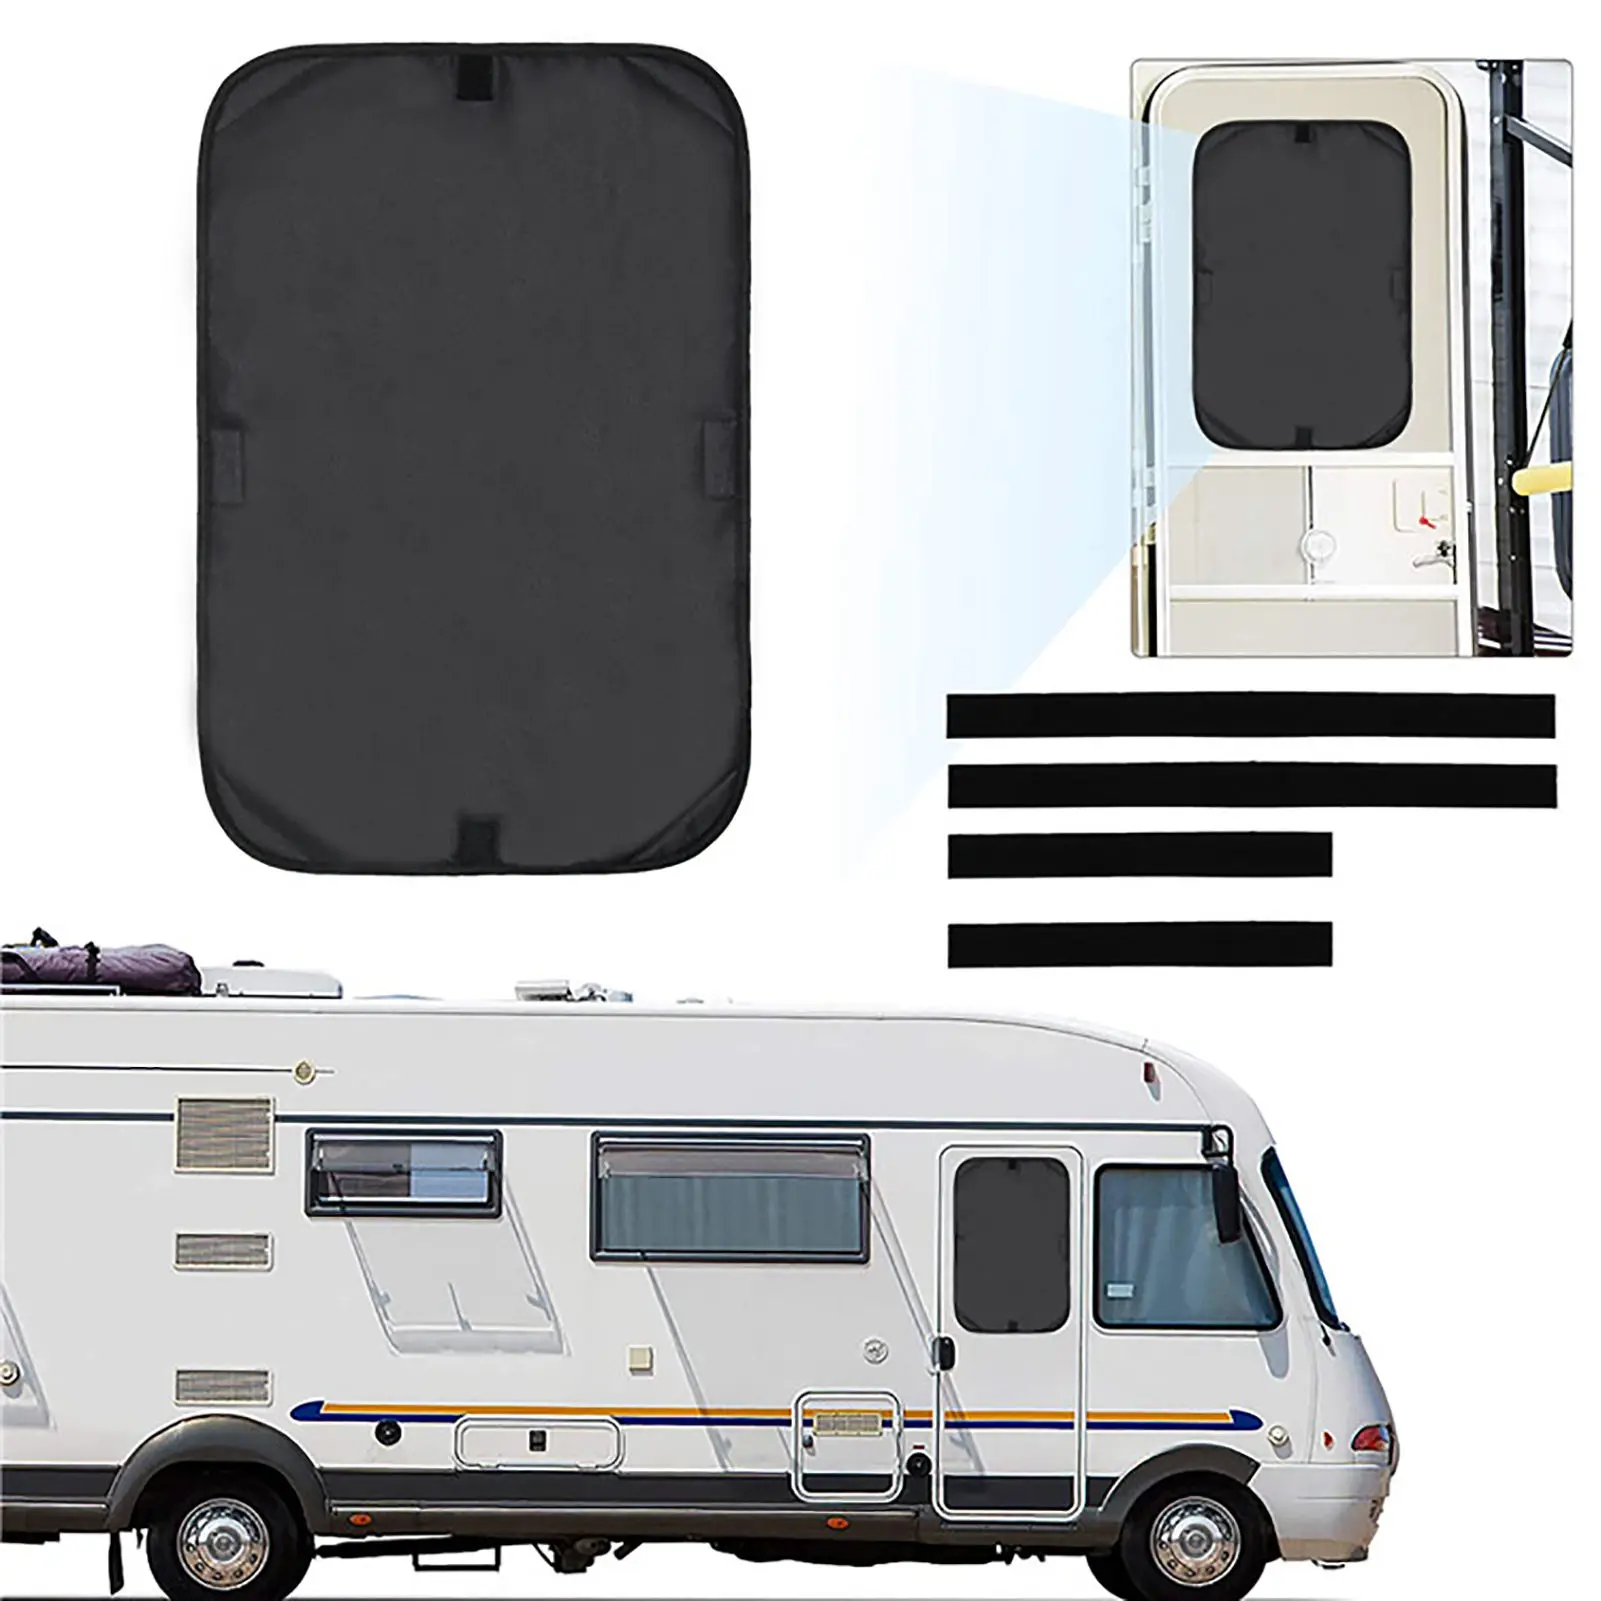 

RV Door Window Shade Cover RV Accessories Interior Camper Window Coverings Blackout Shades For Travel Trailer Motorhome Camping